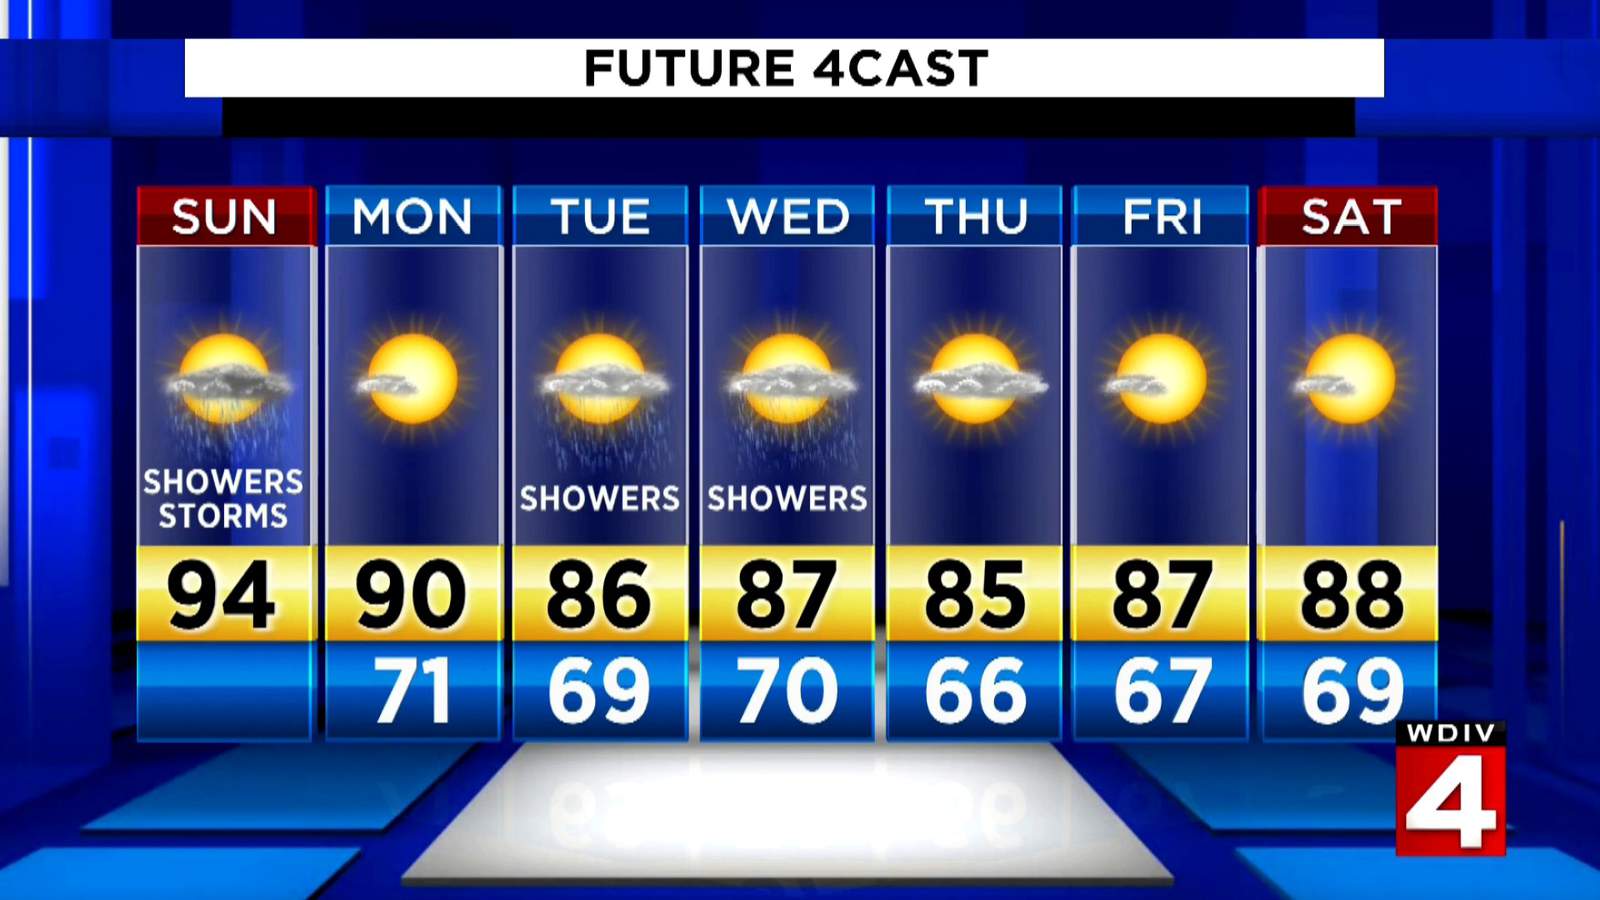 Metro Detroit weather: Heat advisory Sunday with strong showers, thunderstorms possible